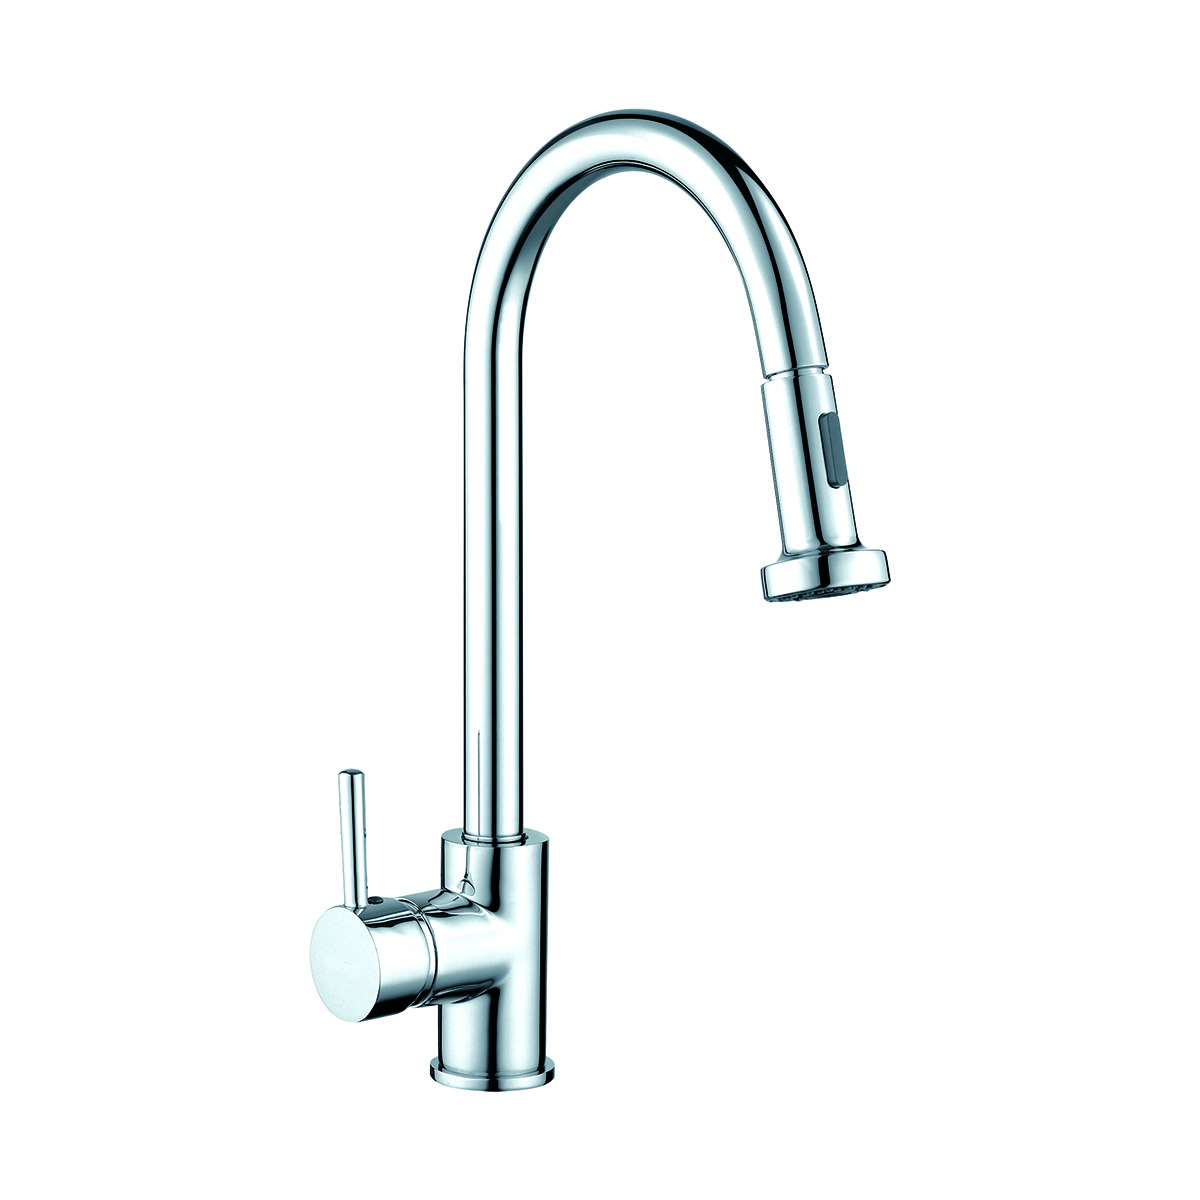 Lucia Single Lever Pull-Out Tap in chrome